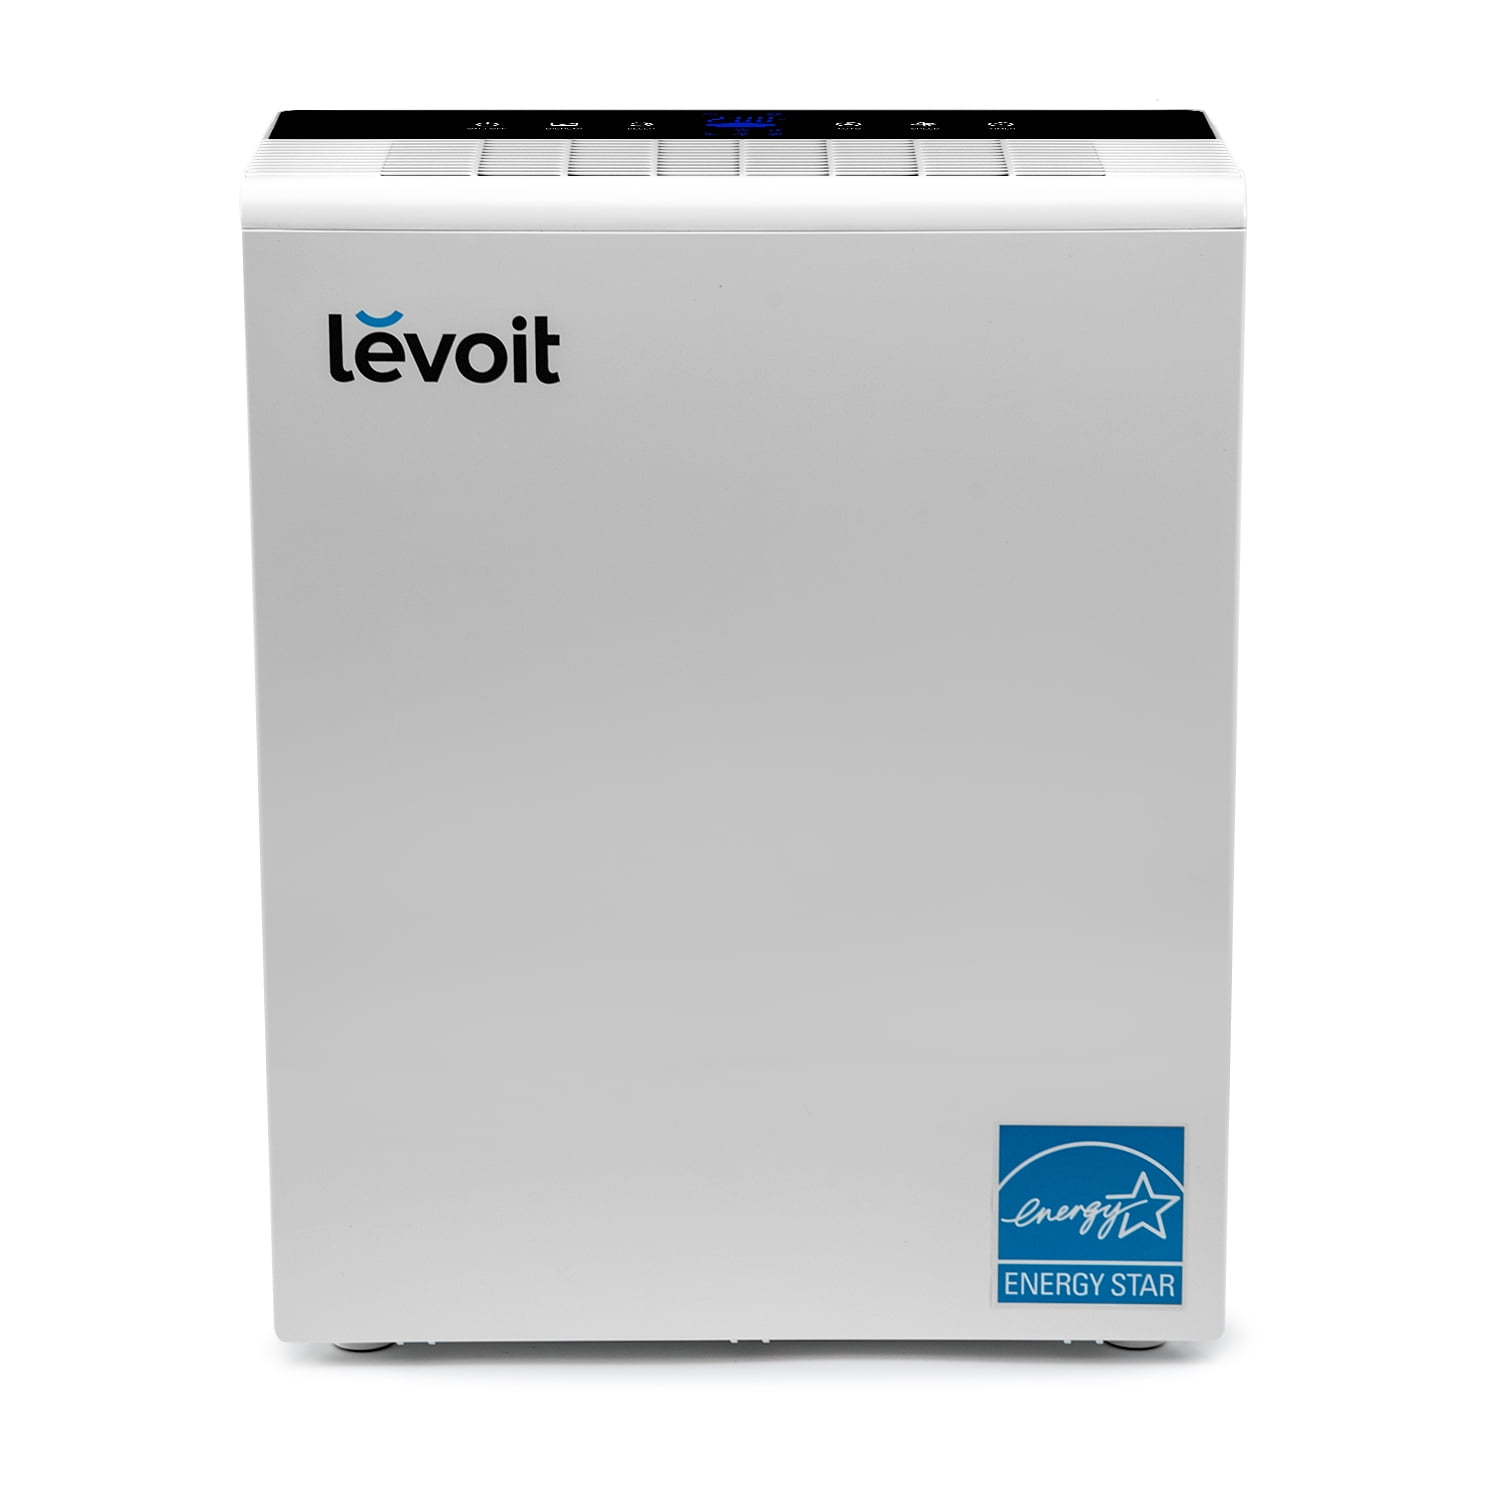 Levoit Smart Wi-Fi Air Purifier with H13 True HEPA Filter, Cleanses the  Air, Covers 290 Sq ft, White 